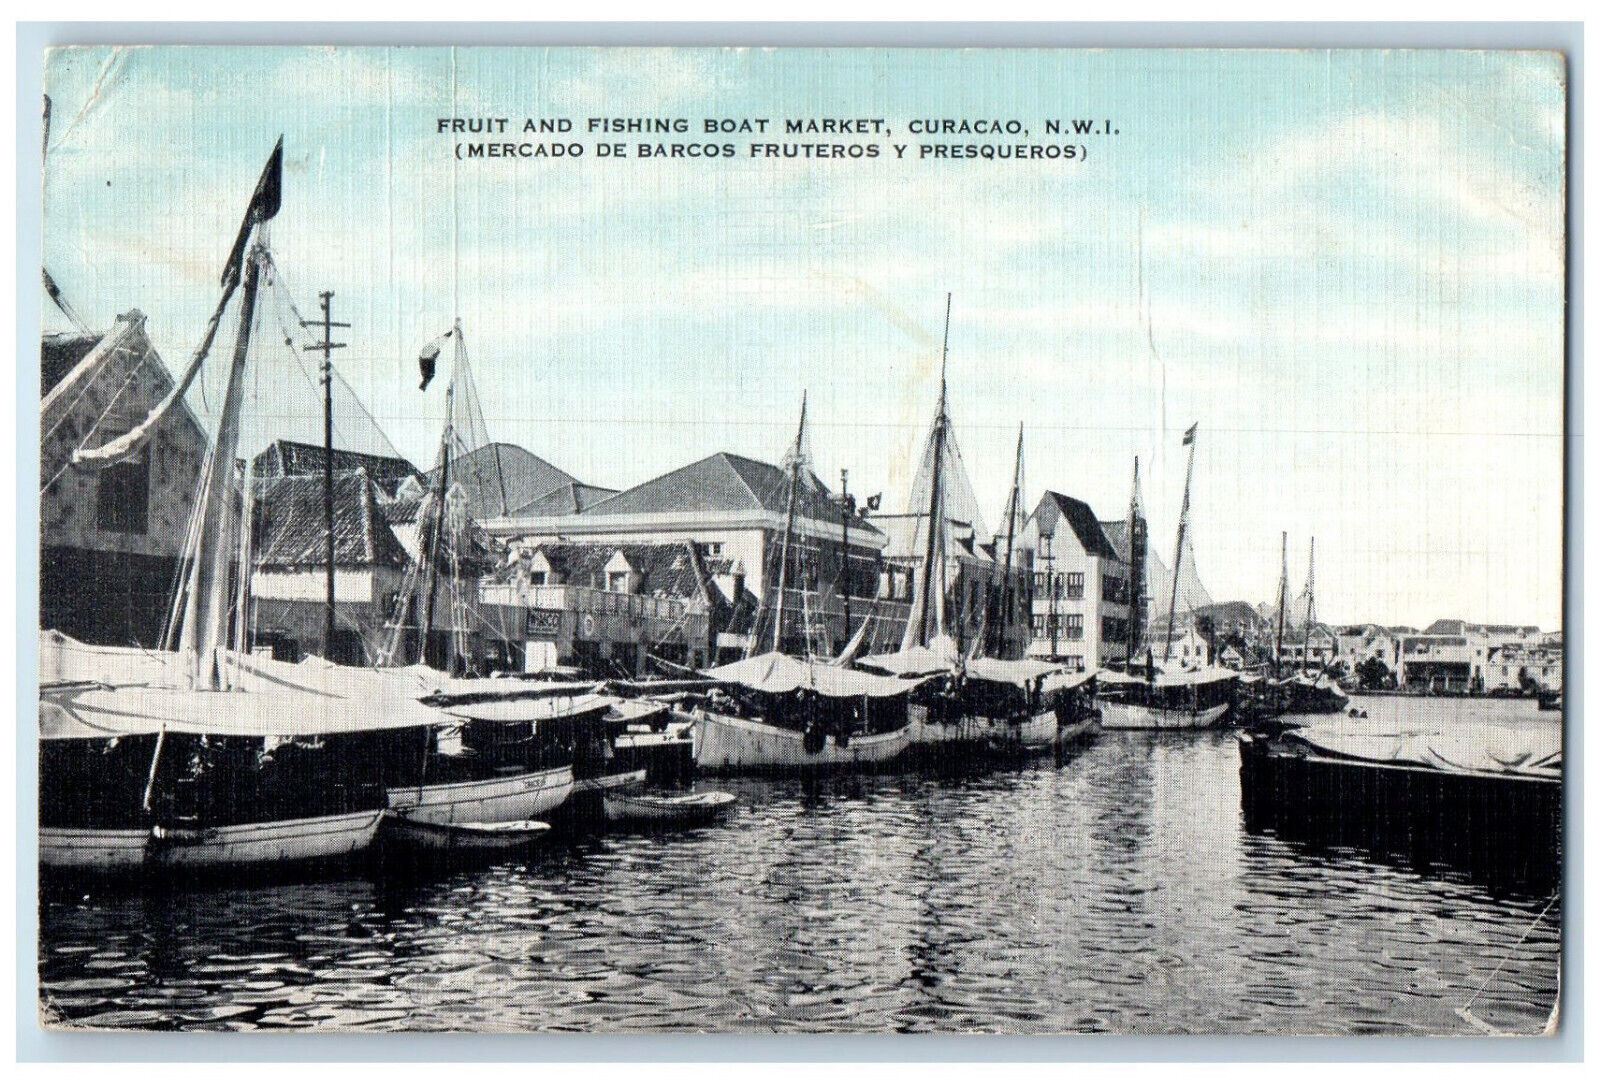 c1940\'s Fruit and Fishing Boat Market Curacao N.W.I. Vintage Posted Postcard